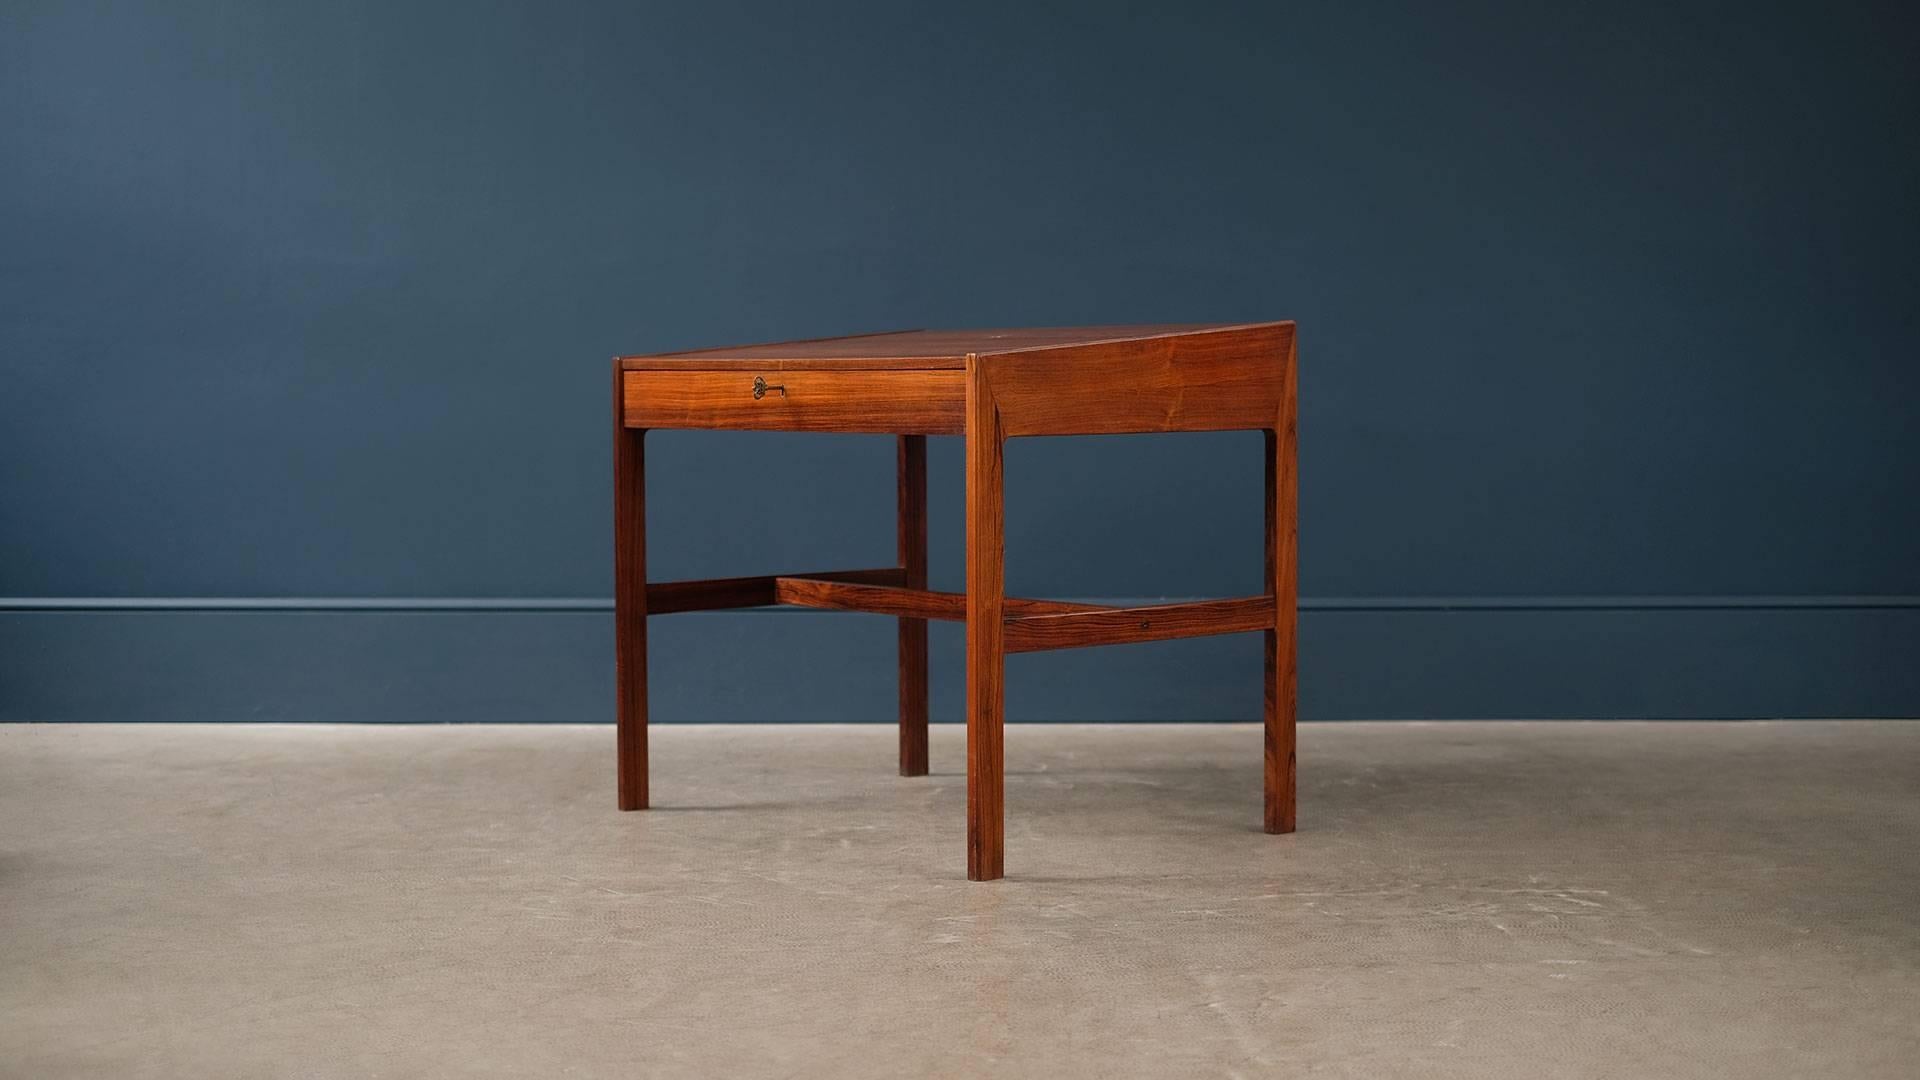 Beautiful desk or dressing table in wonderfully figured rosewood designed by Arne Wahl Iversen for Vinde Mobelfabrik, Denmark. Very elegant proportions, superb detailing and super high quality. Great and rare piece.